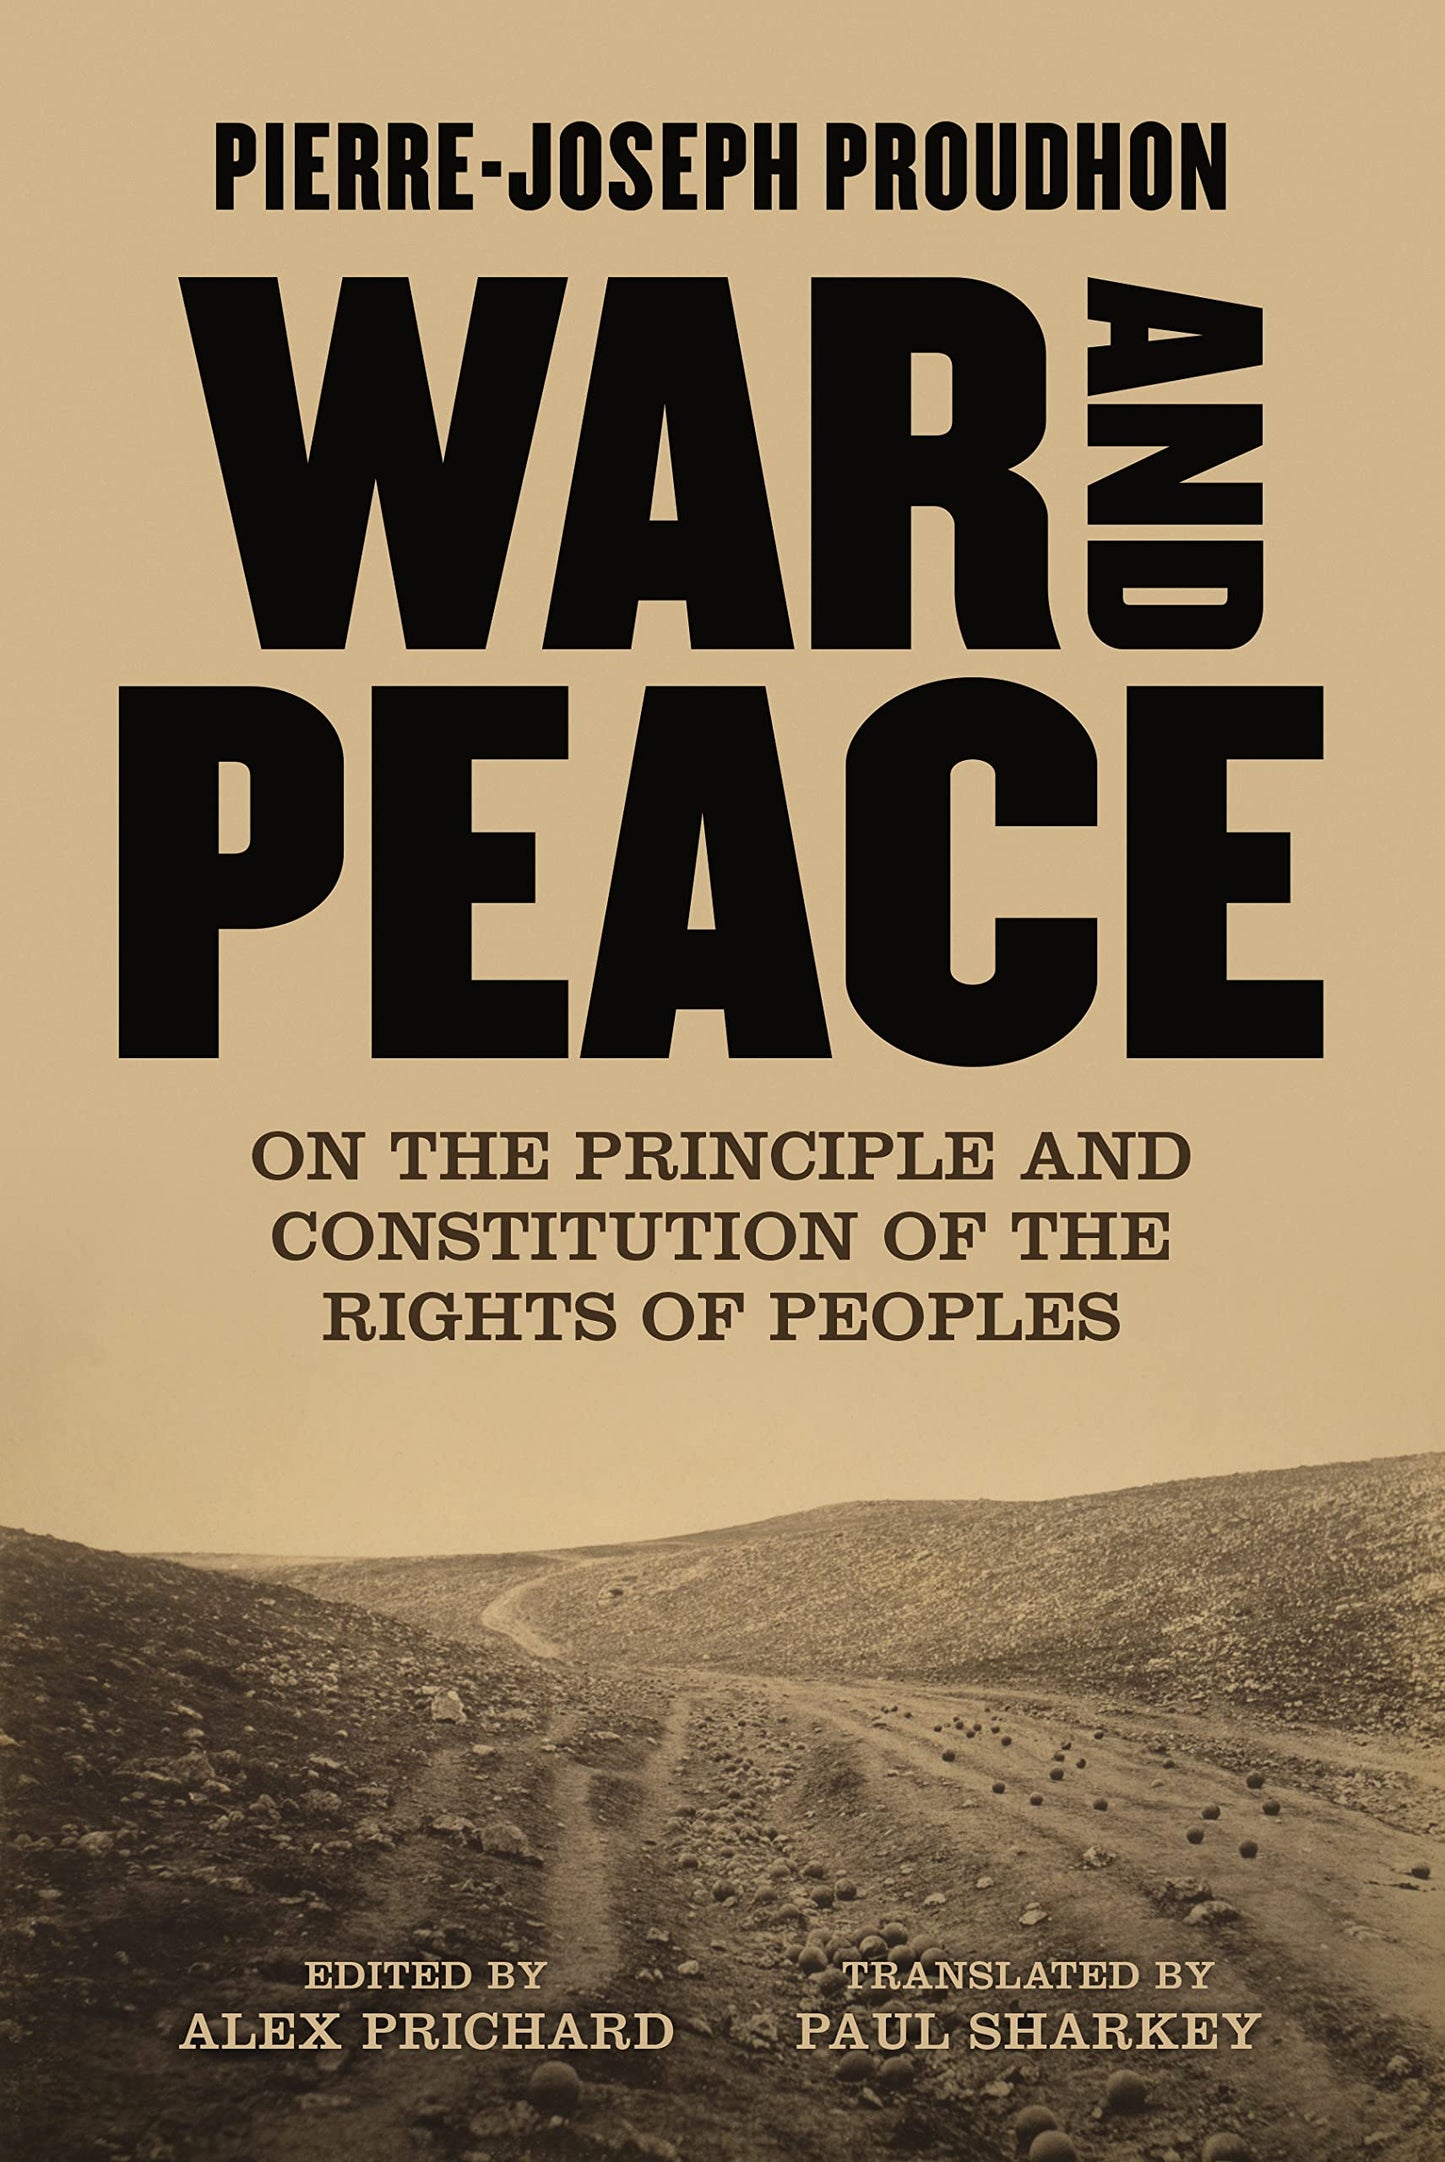 War and Peace: On the Principle and Constitution of the Rights of Peoples, by Pierre-Joseph Proudhon